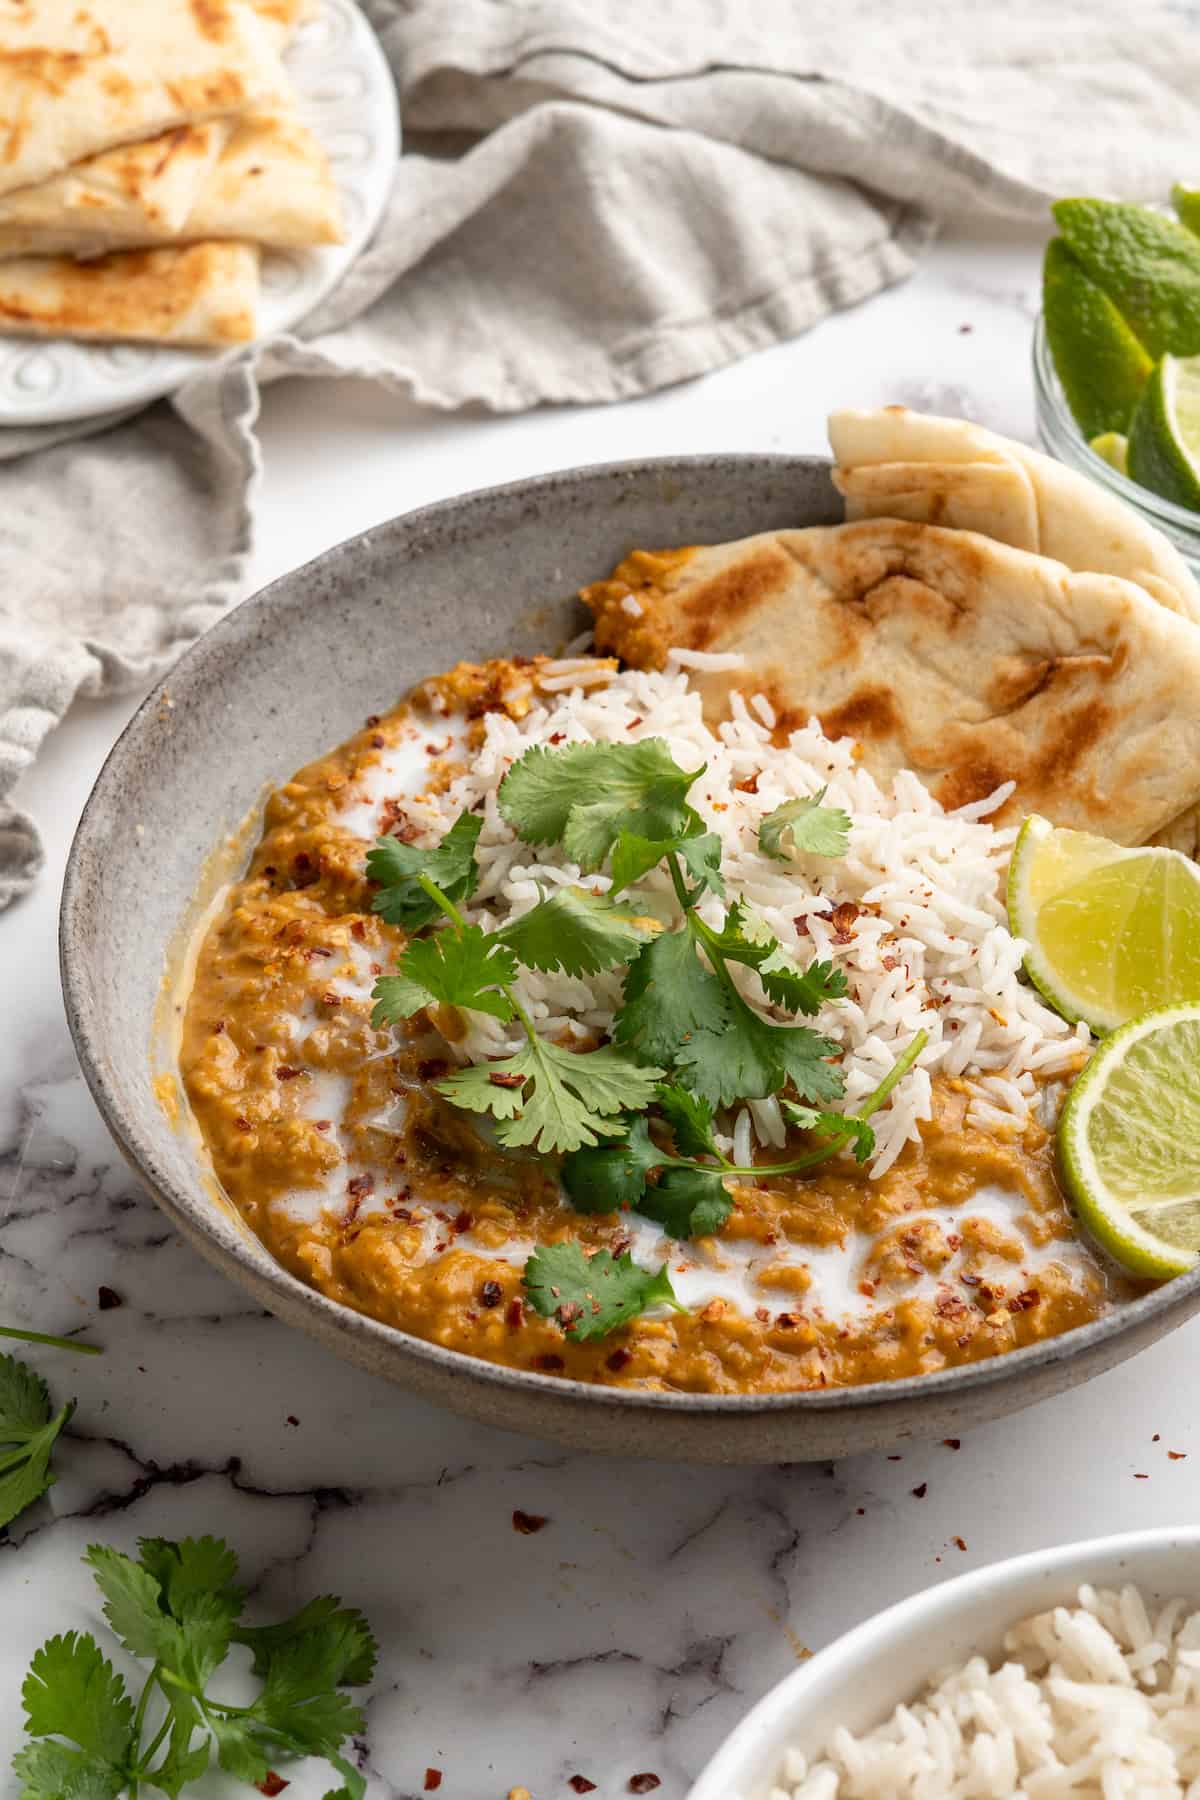 Red lentil curry in bowl with lime wedges, cilantro, rice, and naan